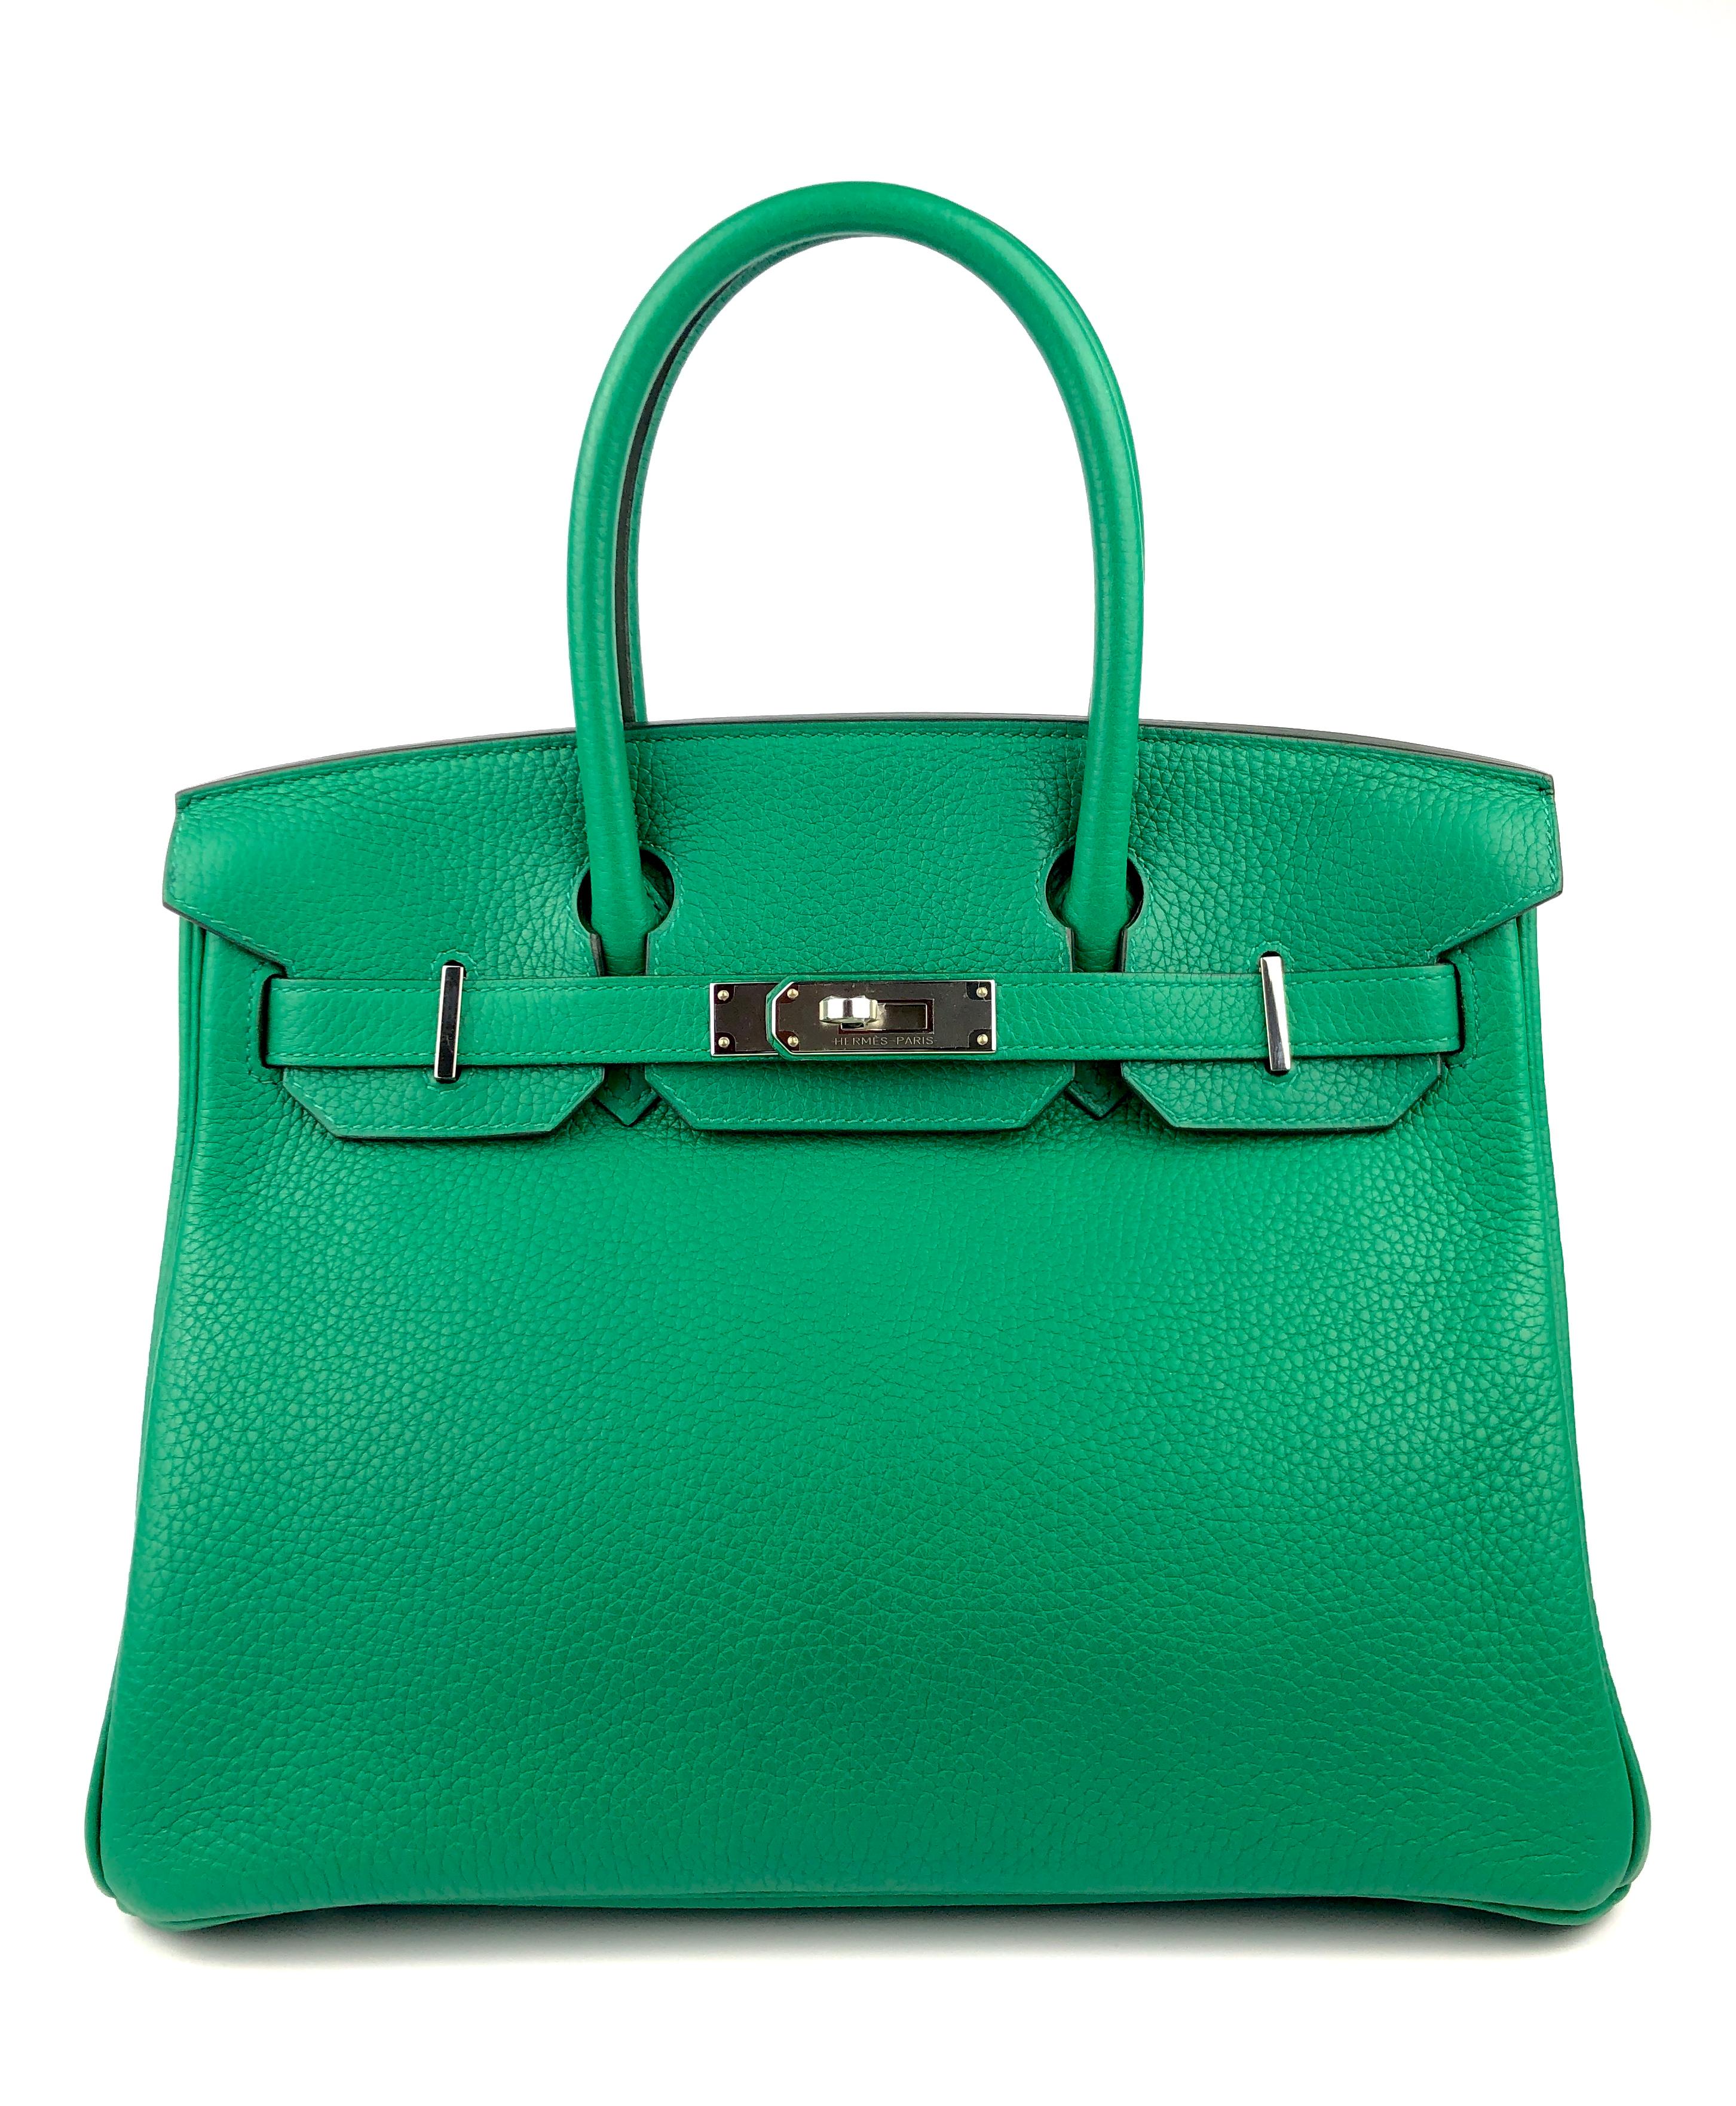 Stunning Pristine Hermes Birkin 30 Bi Color Green Vert Vertigo Vert Fonce Interior complimented by Palladium Hardware. Pristine Condition with Plastic on Hardware. C Stamp 2018.

Shop With Confidence from Lux Addicts. Authenticity Guaranteed!